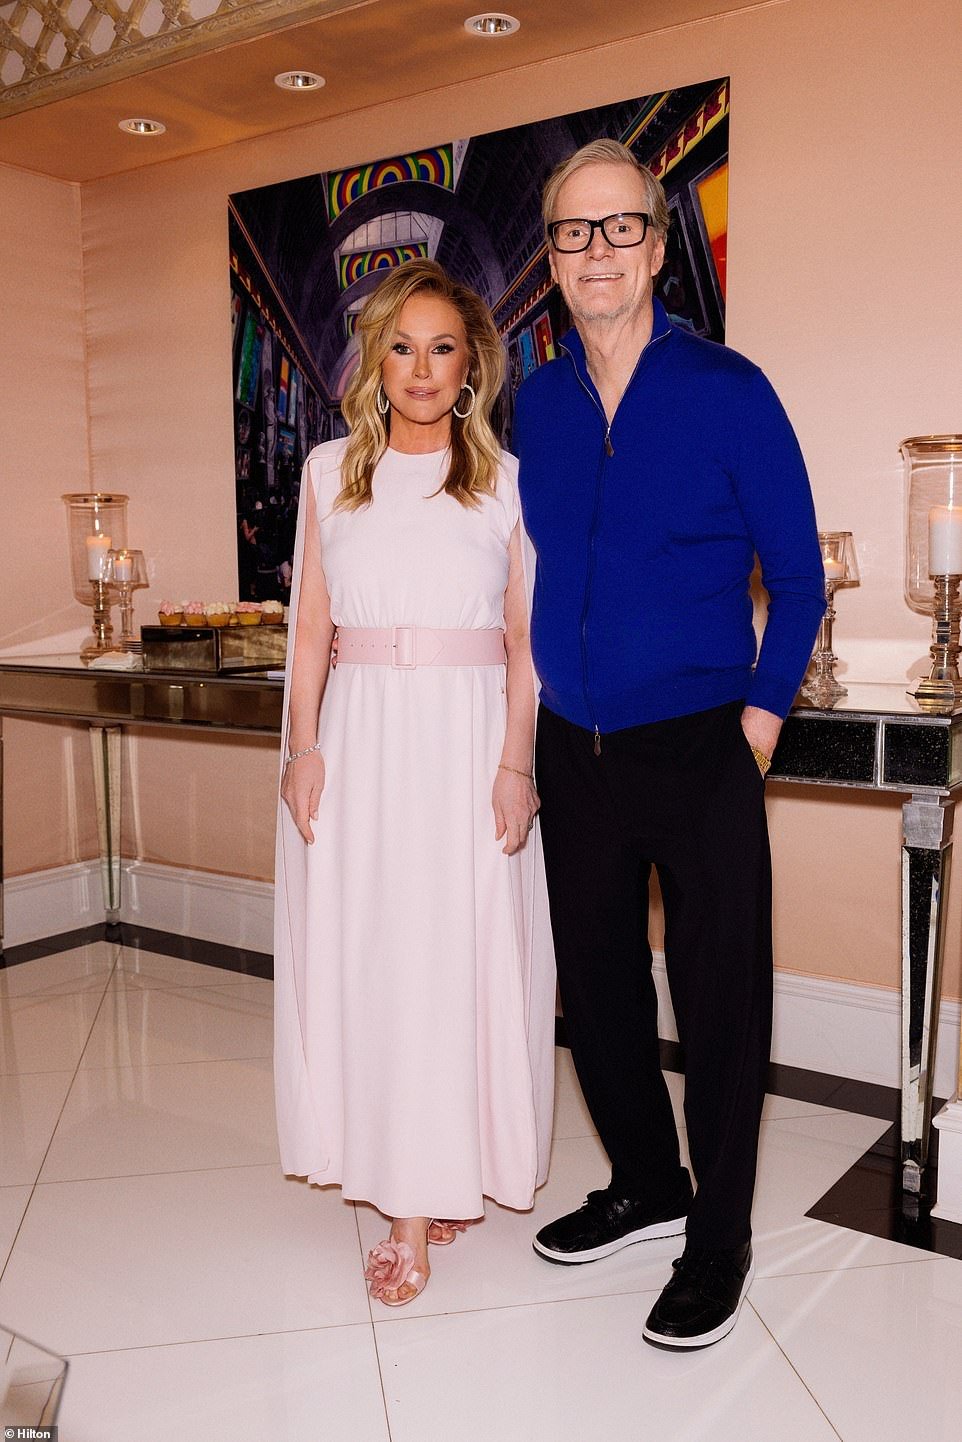 Kathy wore a white dress with pink shoes as she posed with her husband Rick Hilton of Hilton & Hilton